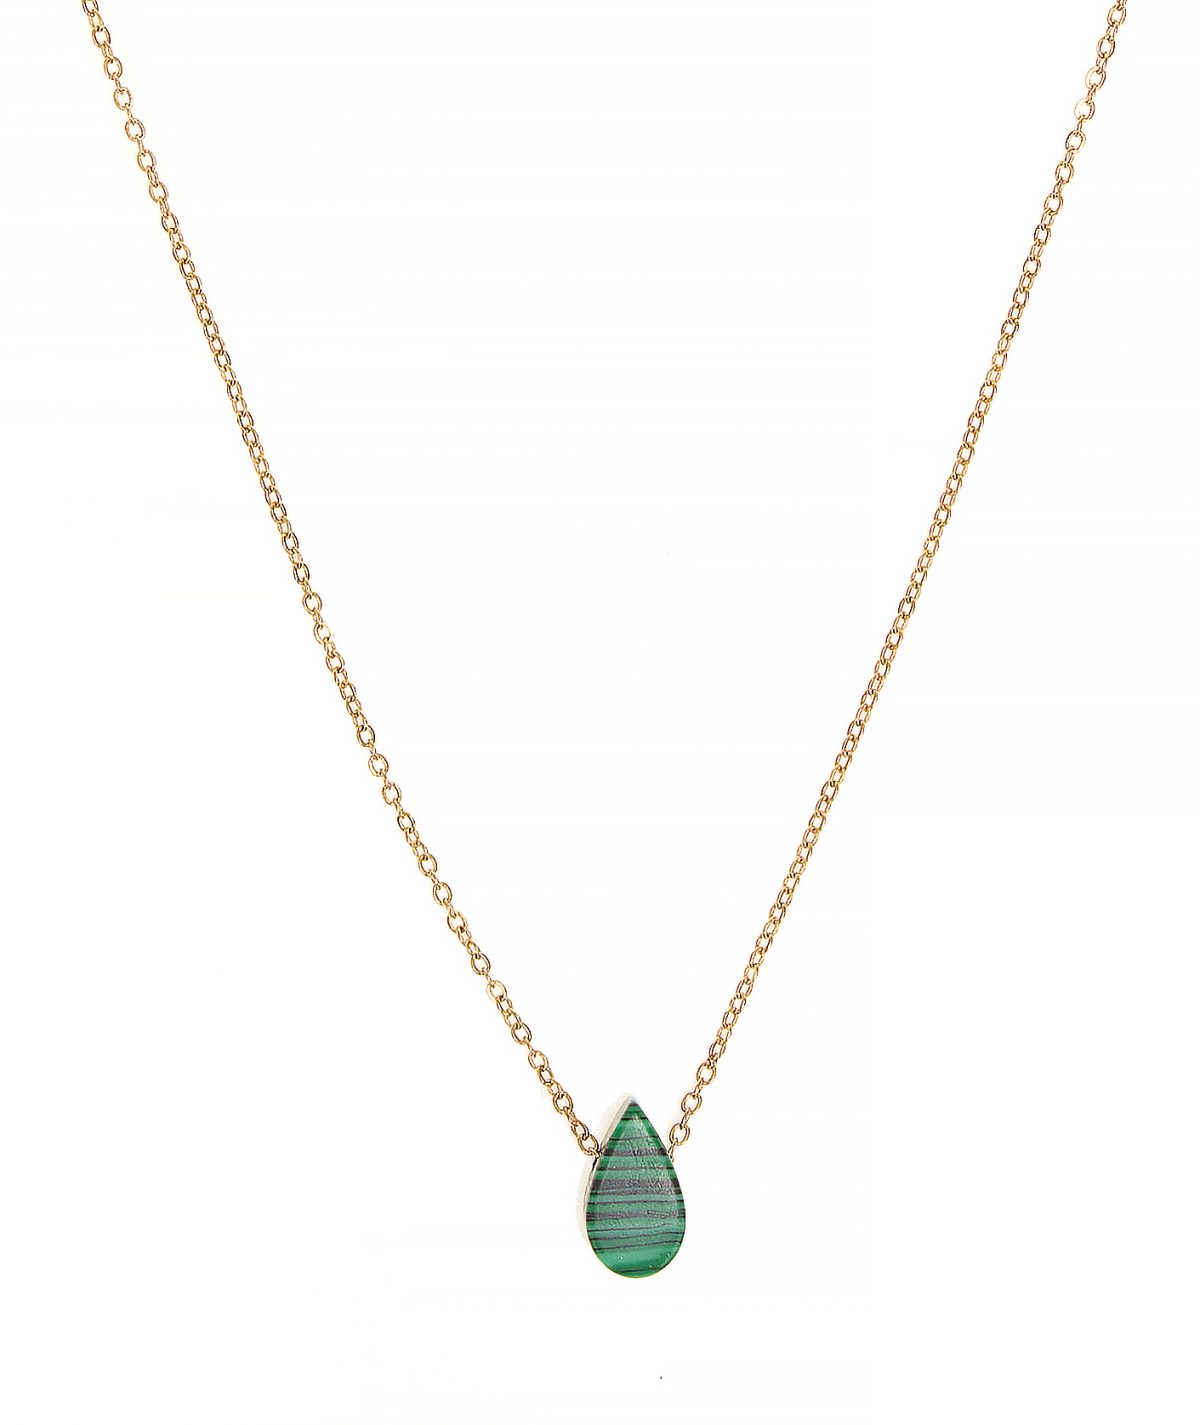 The Blue Drop Stone Necklace by TFD